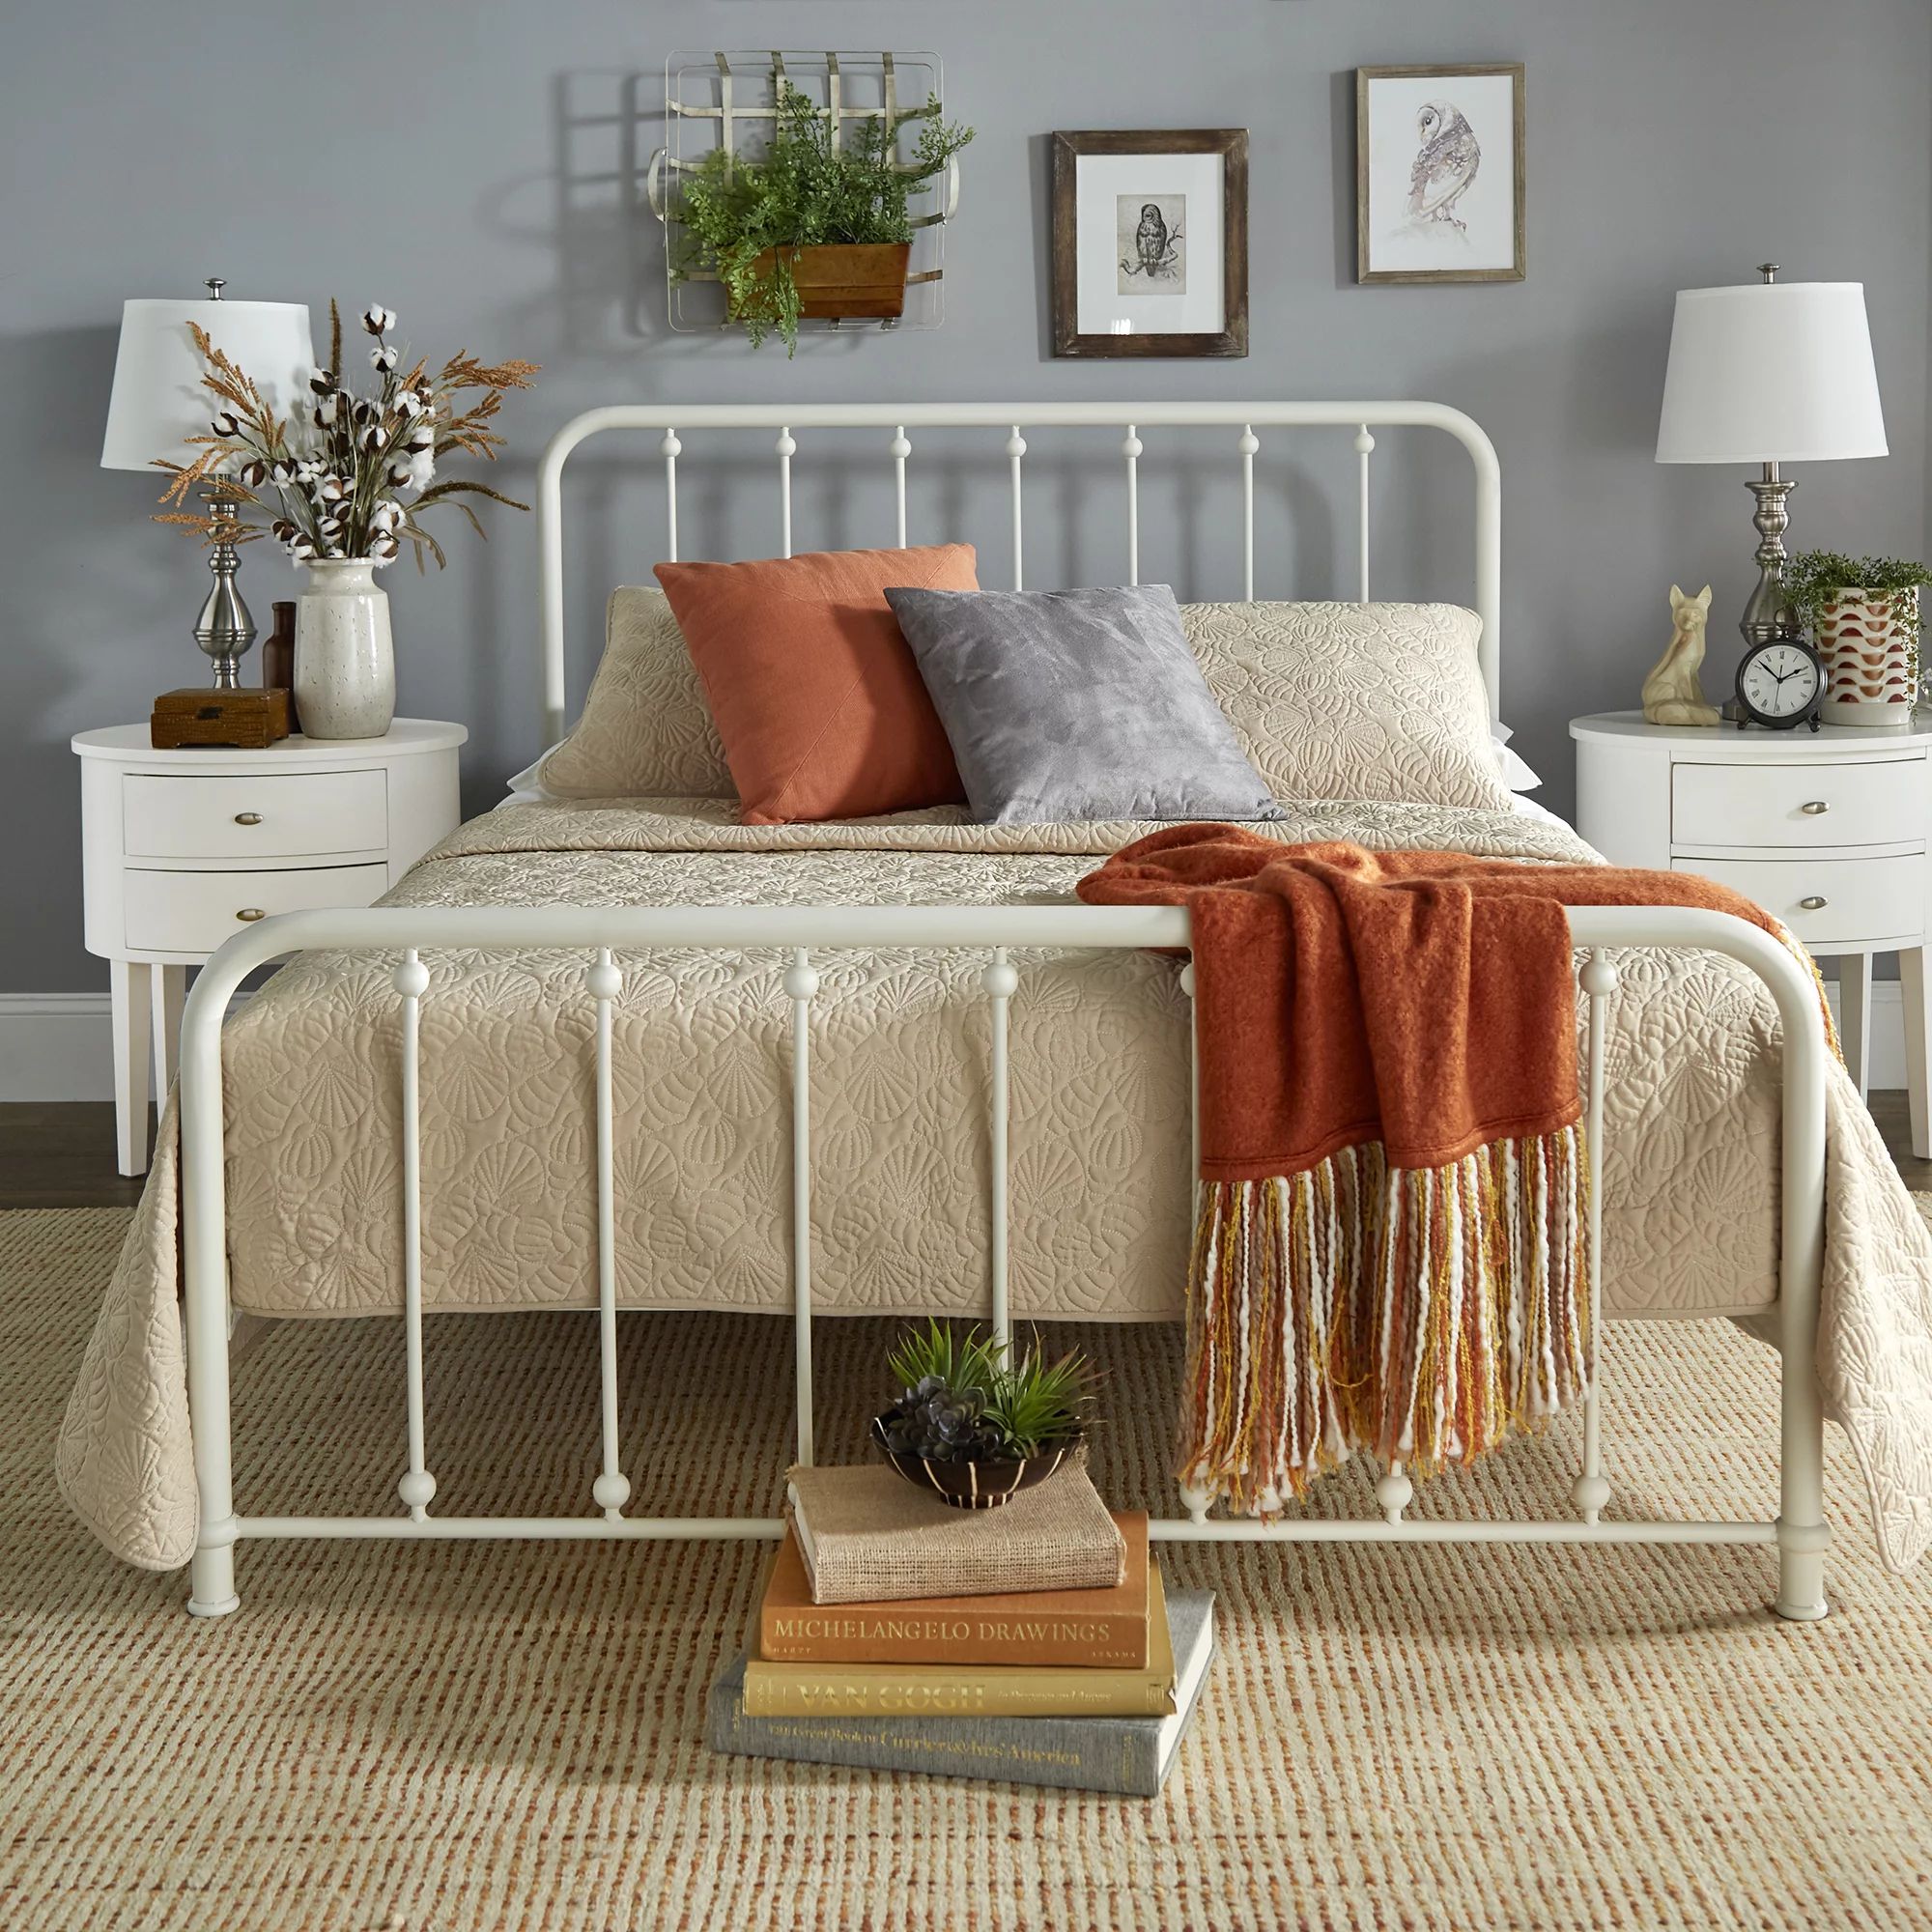 Weston Home Montgomery Spindle Metal Platform Bed, Multiple Sizes and Finishes | Walmart (US)